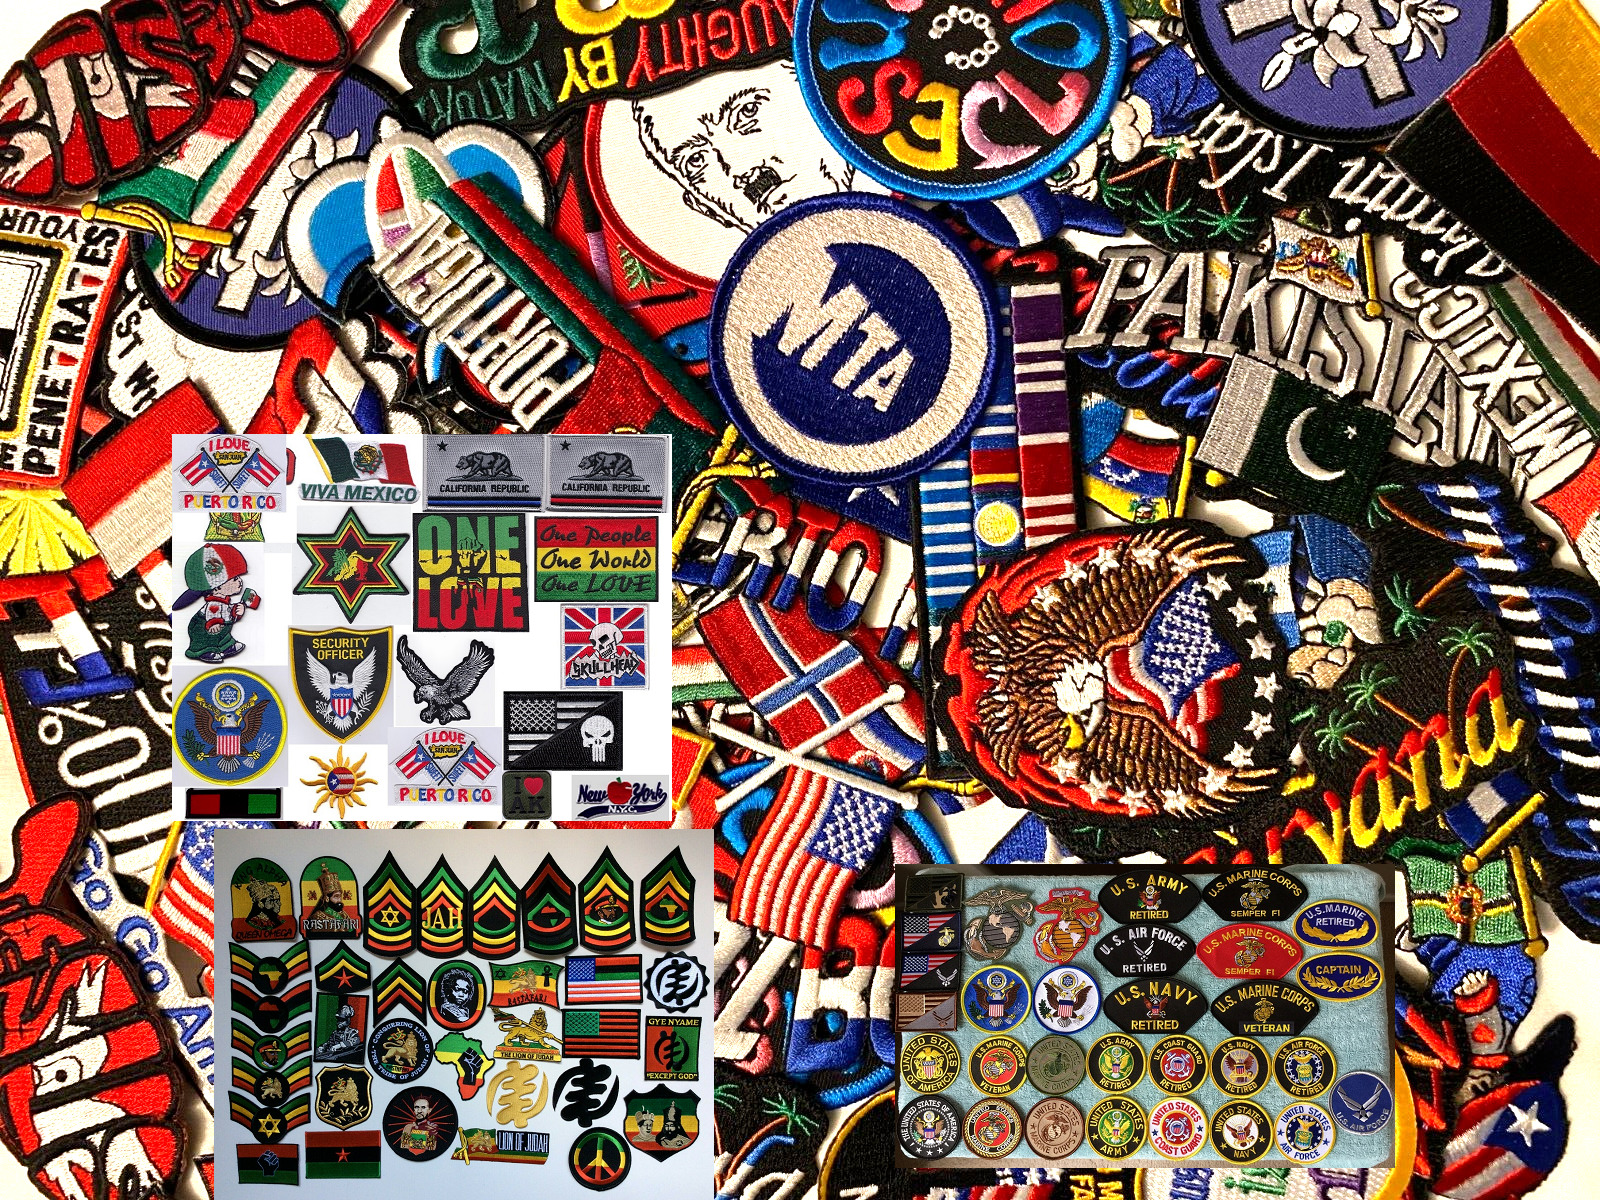 50pcs/lot Random Mix High quality Sew-on Iron-on Embroidered Patches (Auction)